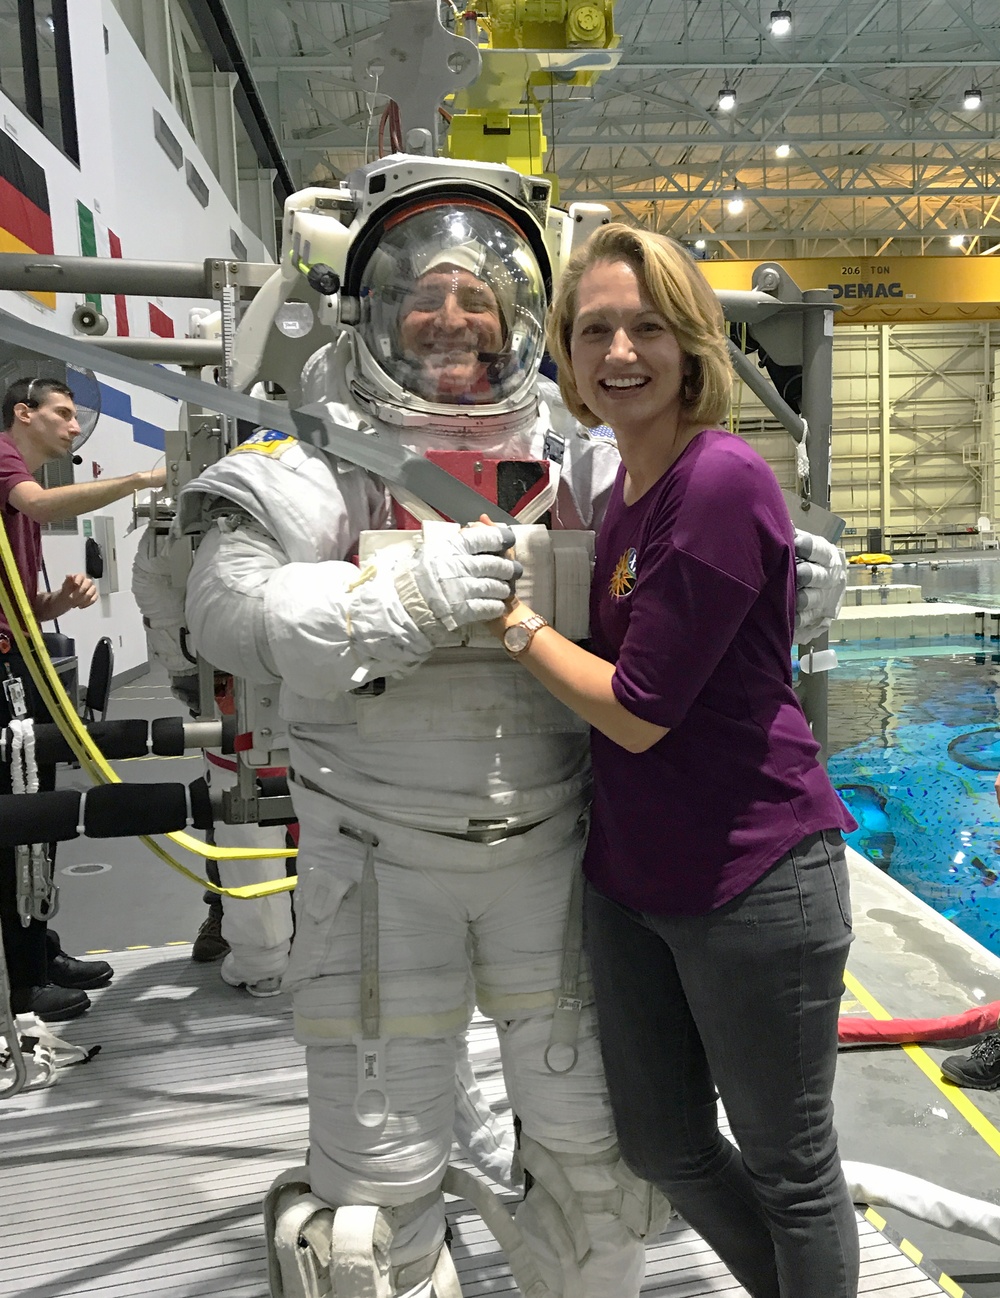 Army astronaut Col. Andrew Morgan and wife Stacey at Neutral Buoyancy Lab